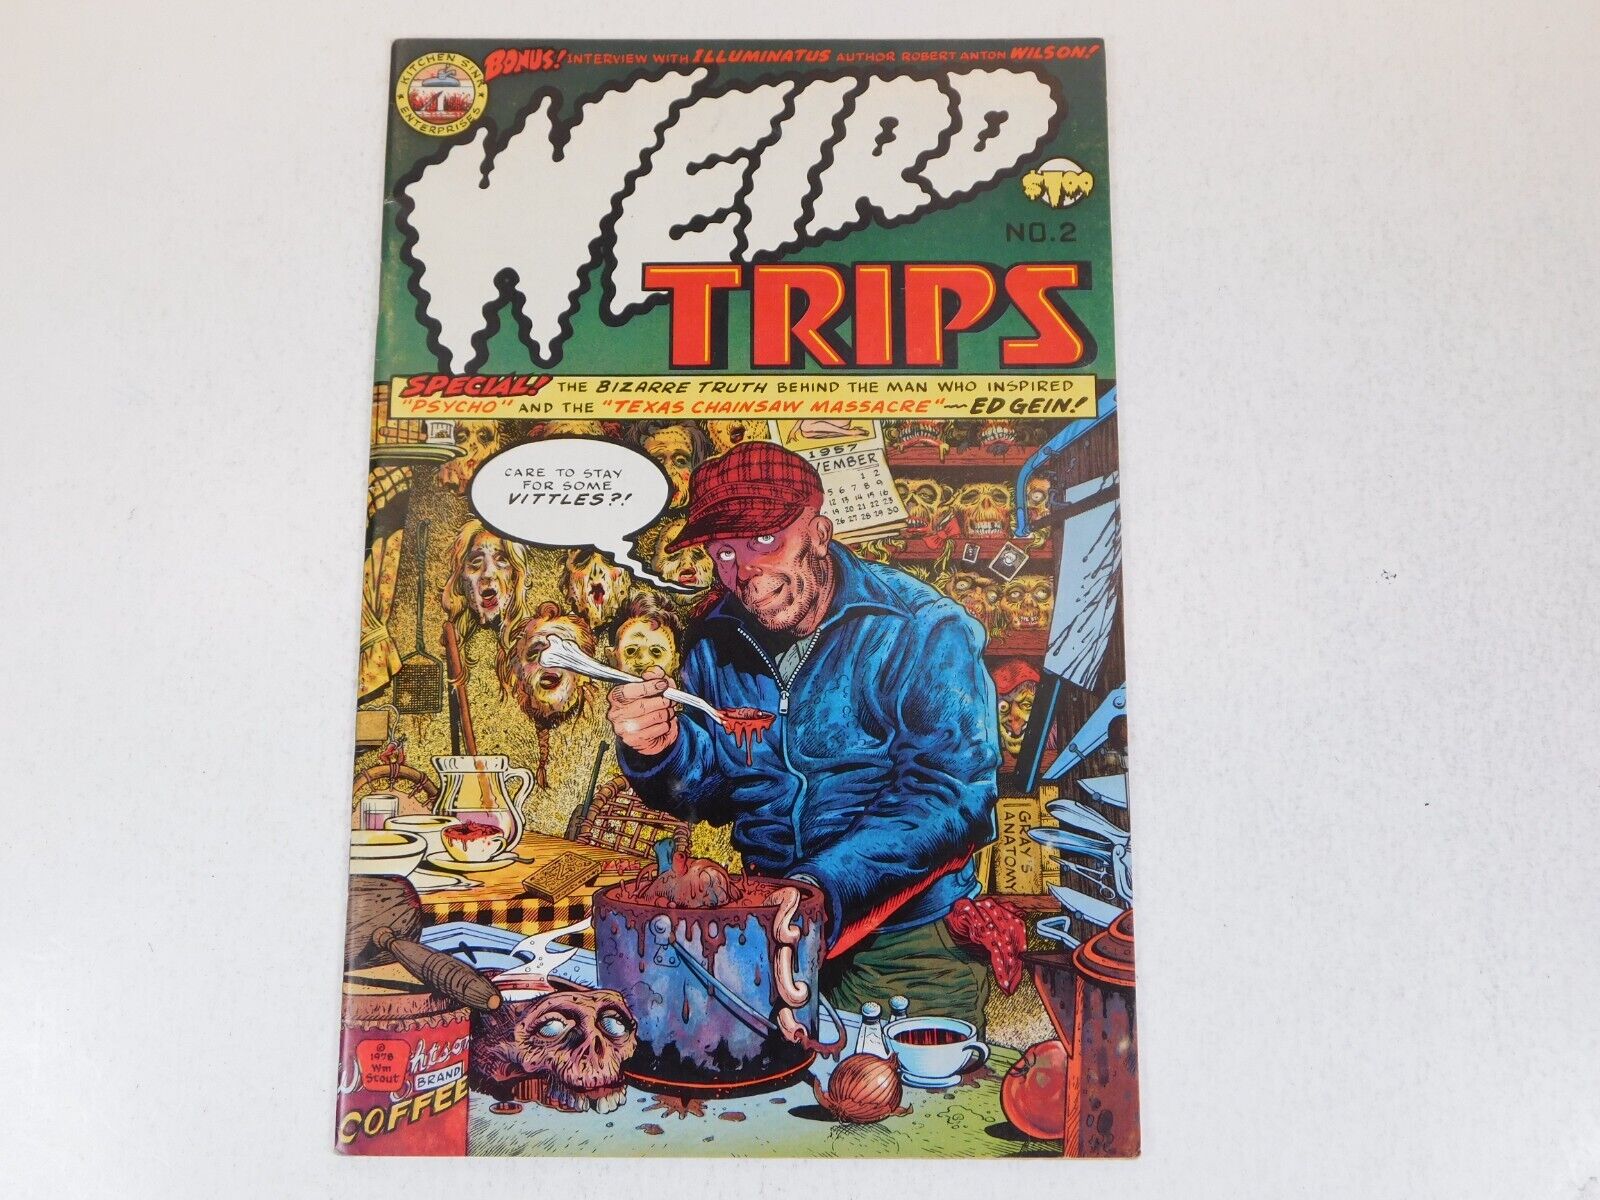 WEIRD TRIPS #2 1978 ED GEIN STORY - Comic Recalled & Banned By Family Lawsuit